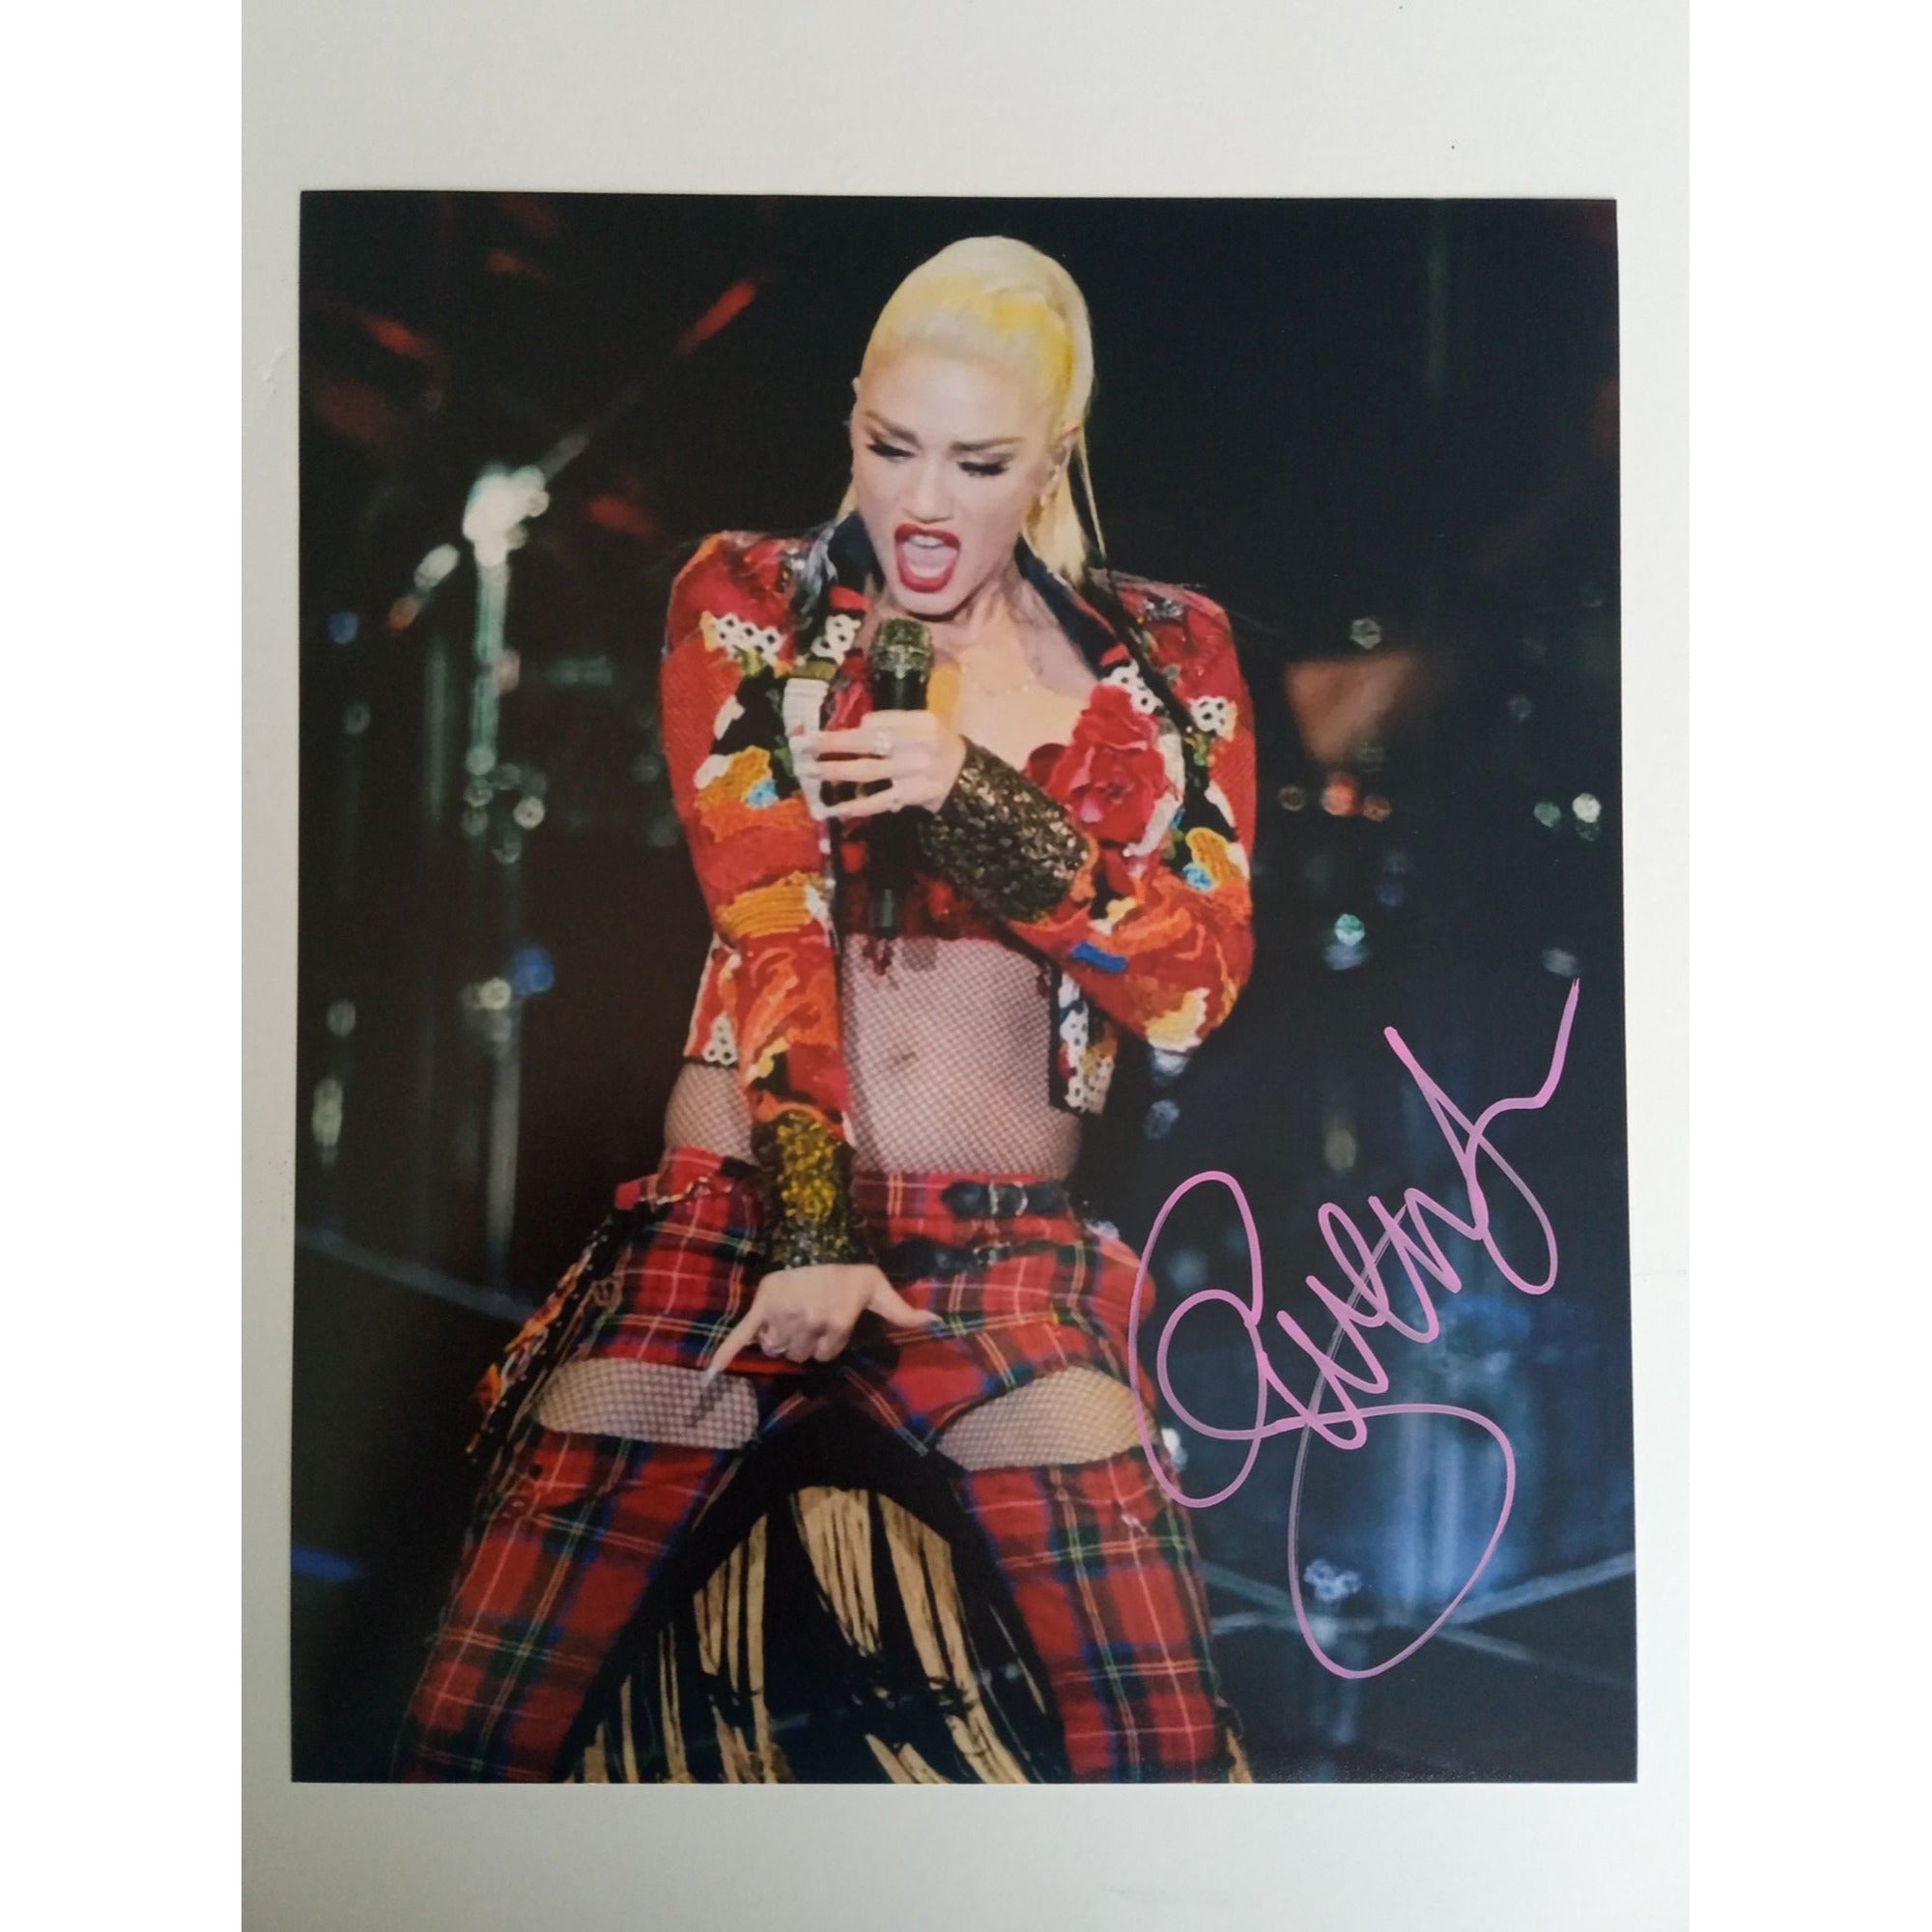 Gwen Stefani 8 by 10 signed photo with proof